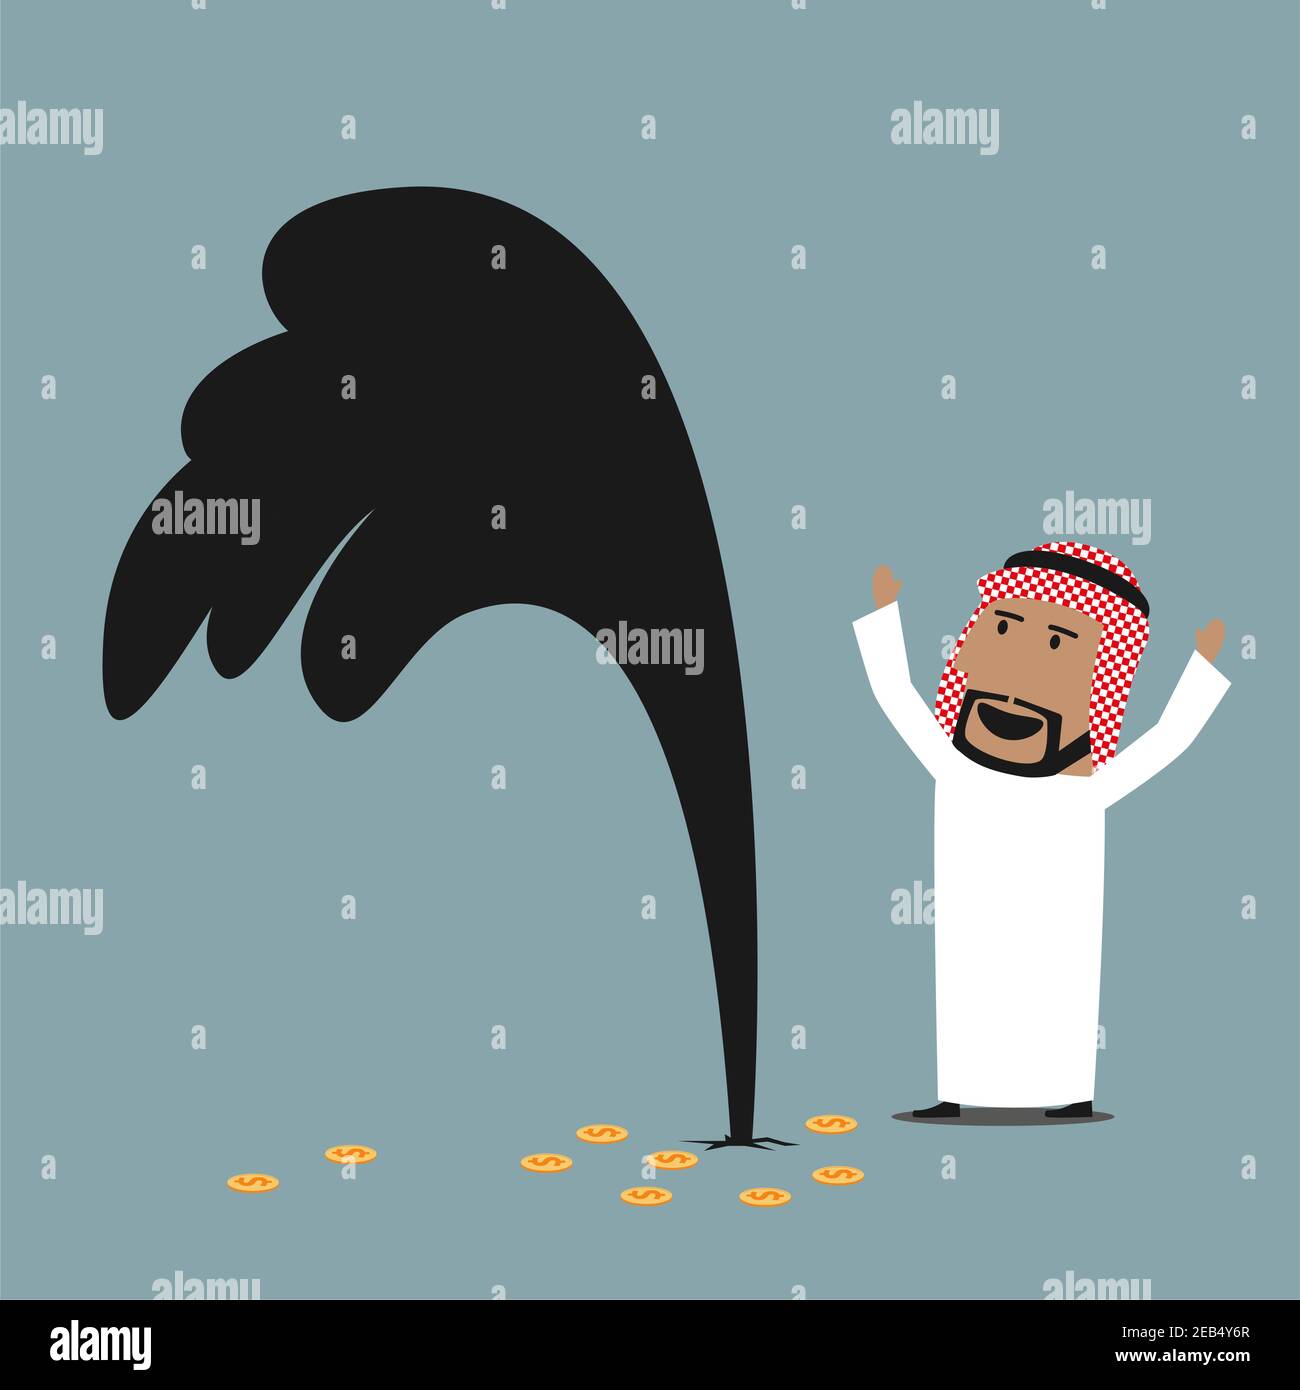 Cartoon wealthy and lucky arabian businessman standing near an oil gusher and celebrating successful discovery of oil well. Success, wealth or oil ind Stock Vector